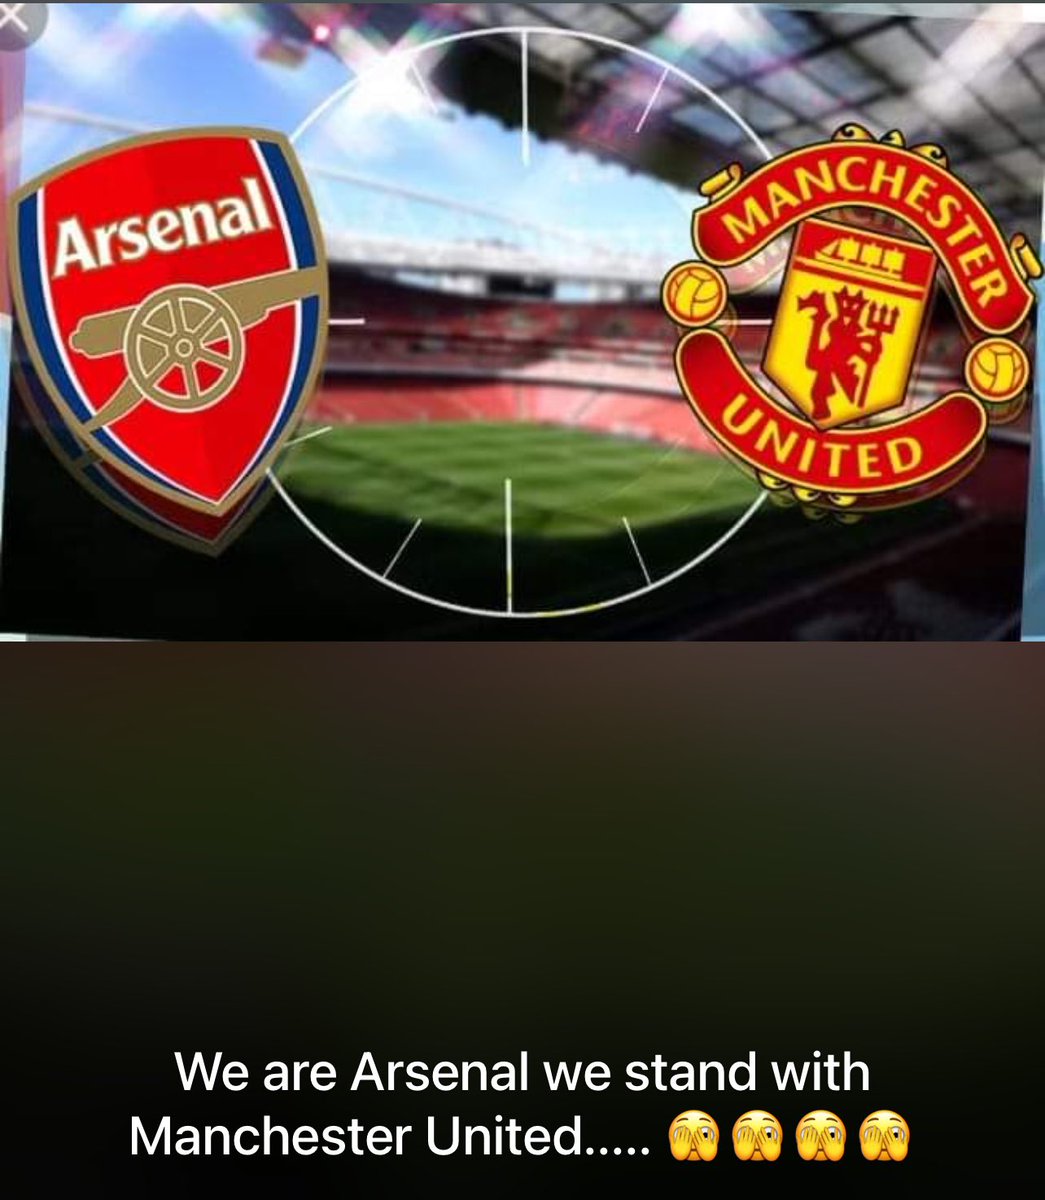 I stand with Manchester United